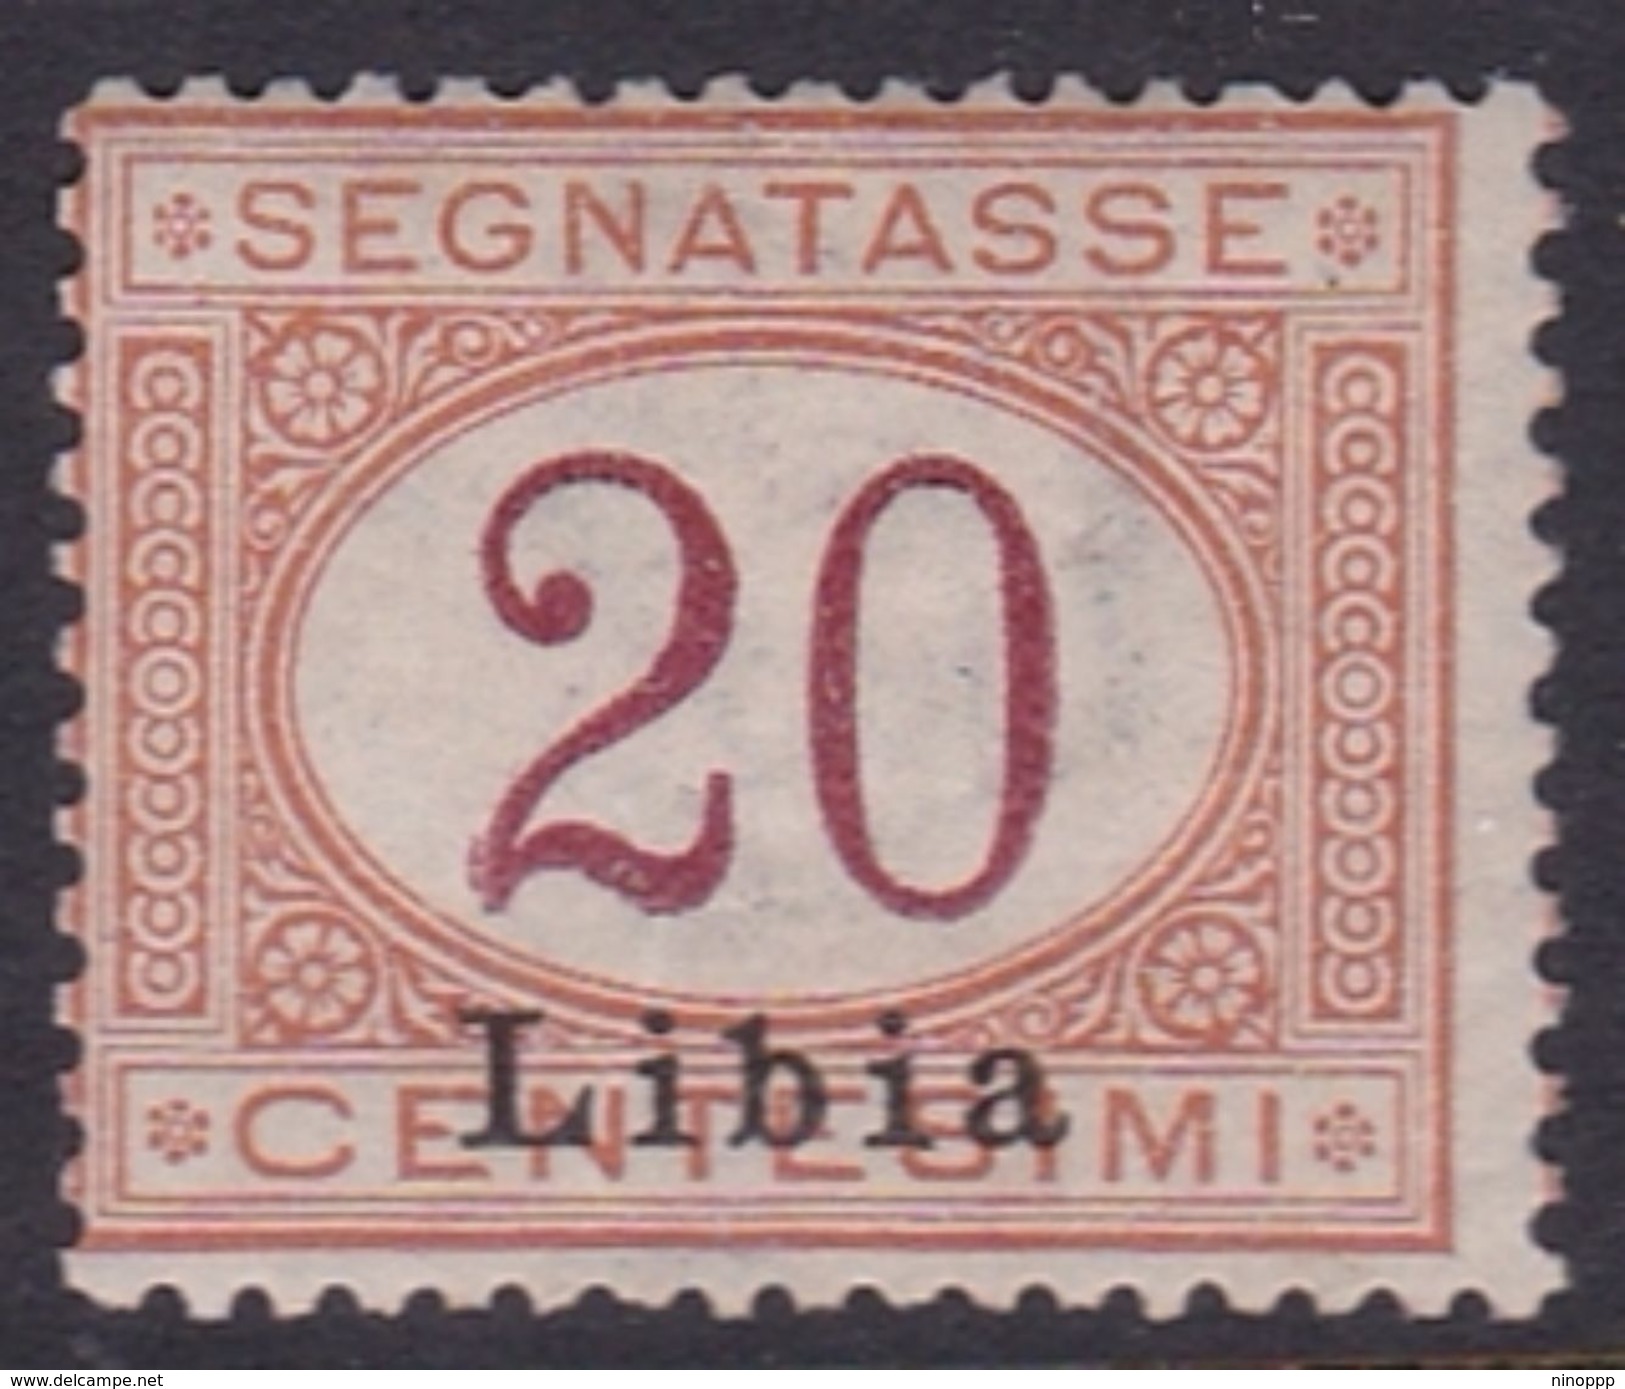 Italy-Colonies And Territories-Libya PD 3 1915 Postage Due,20c Orange And Carmine,mint Hinged - Libya